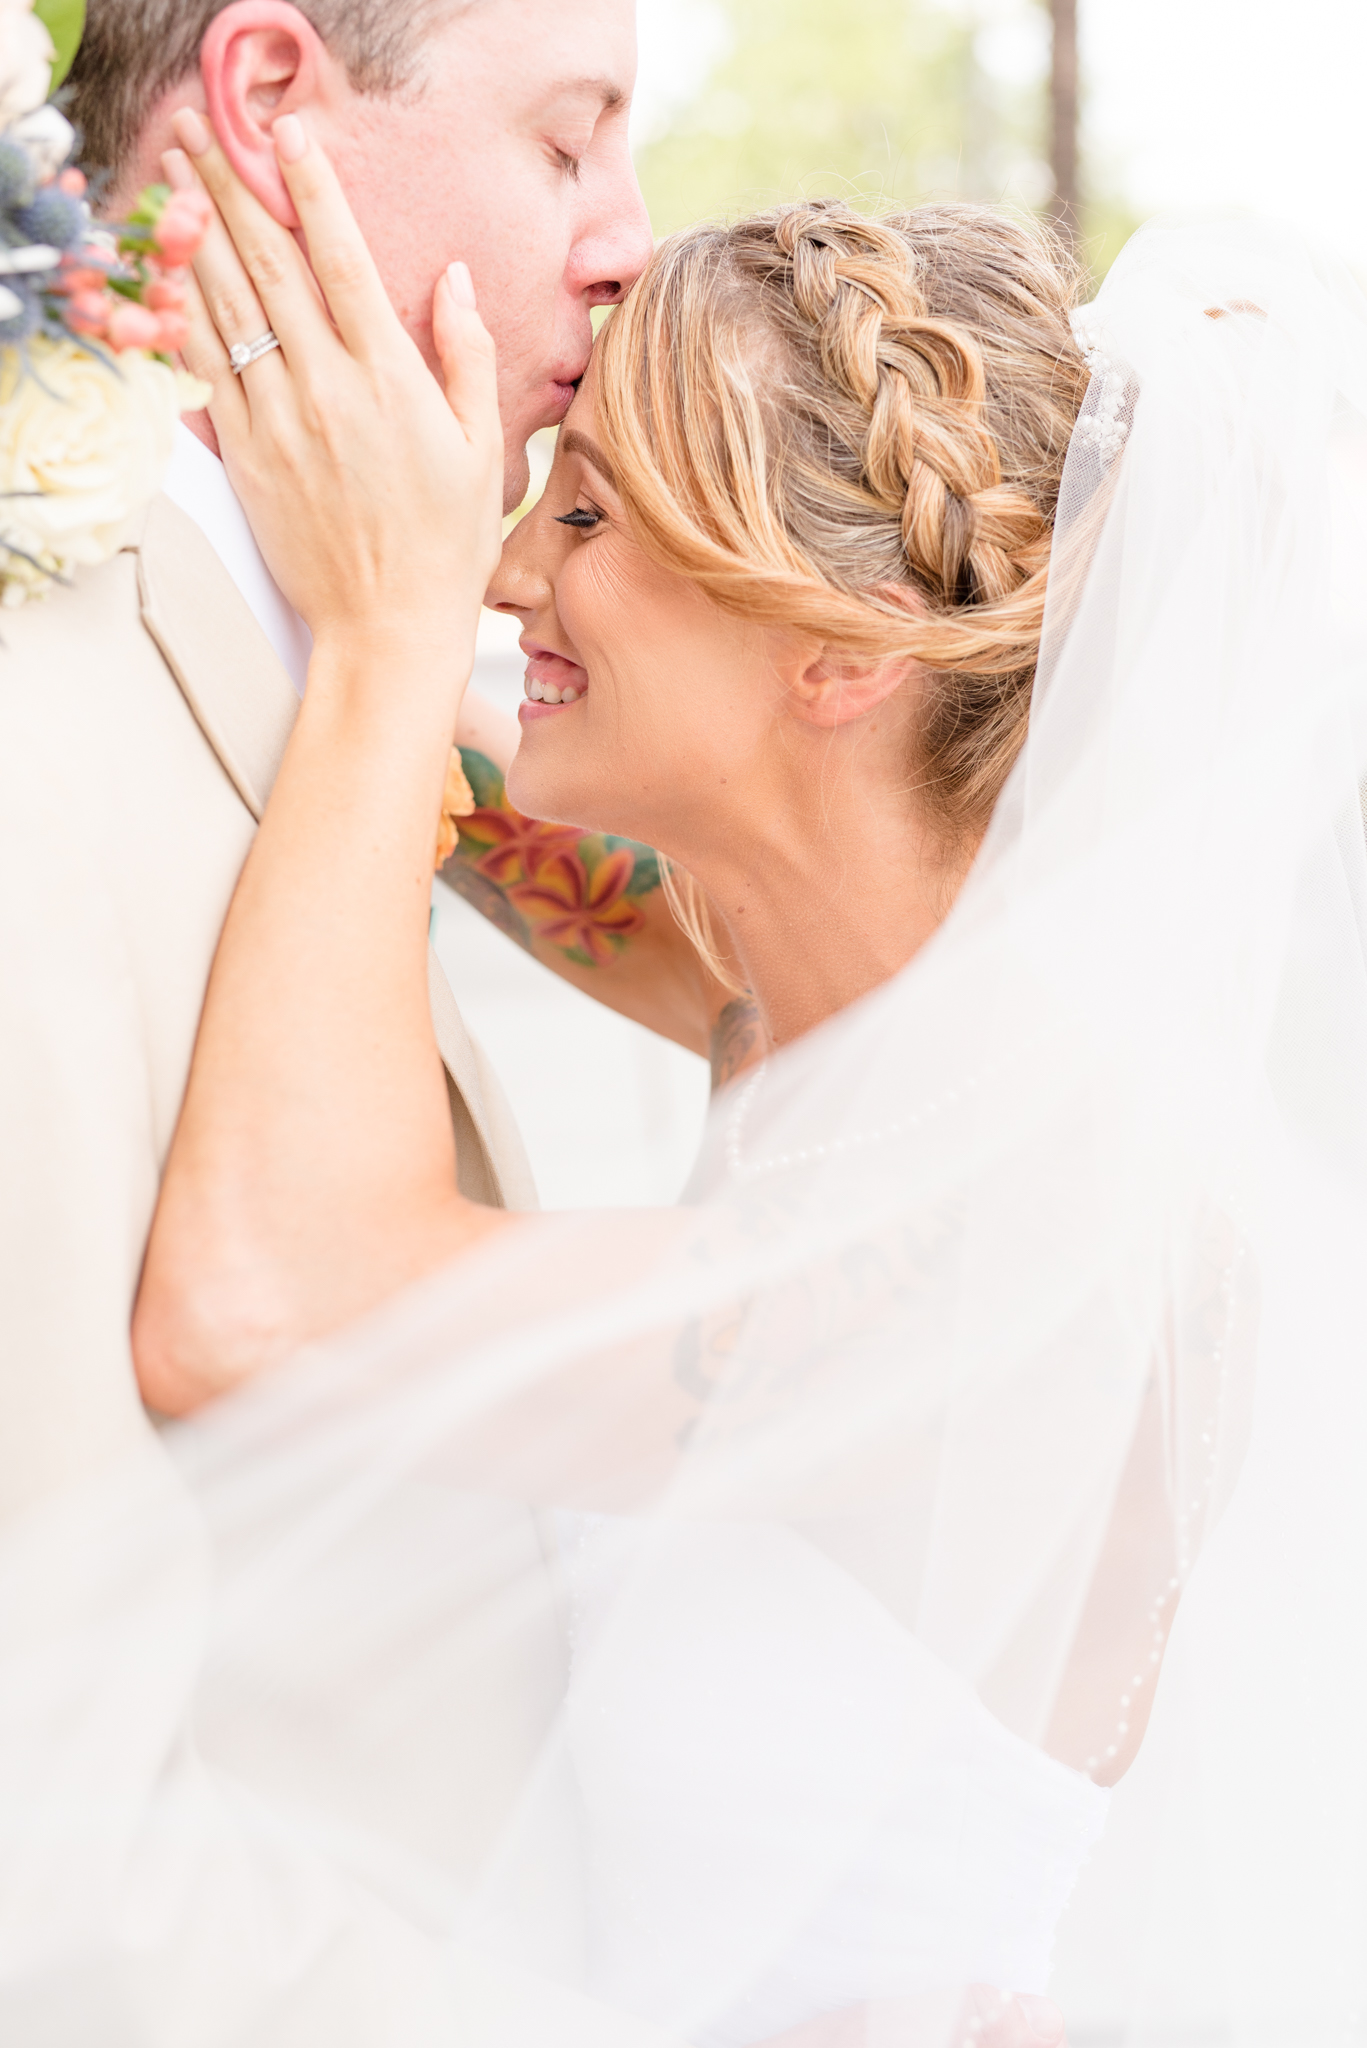 Groom kisses brides forehead while she smiles.